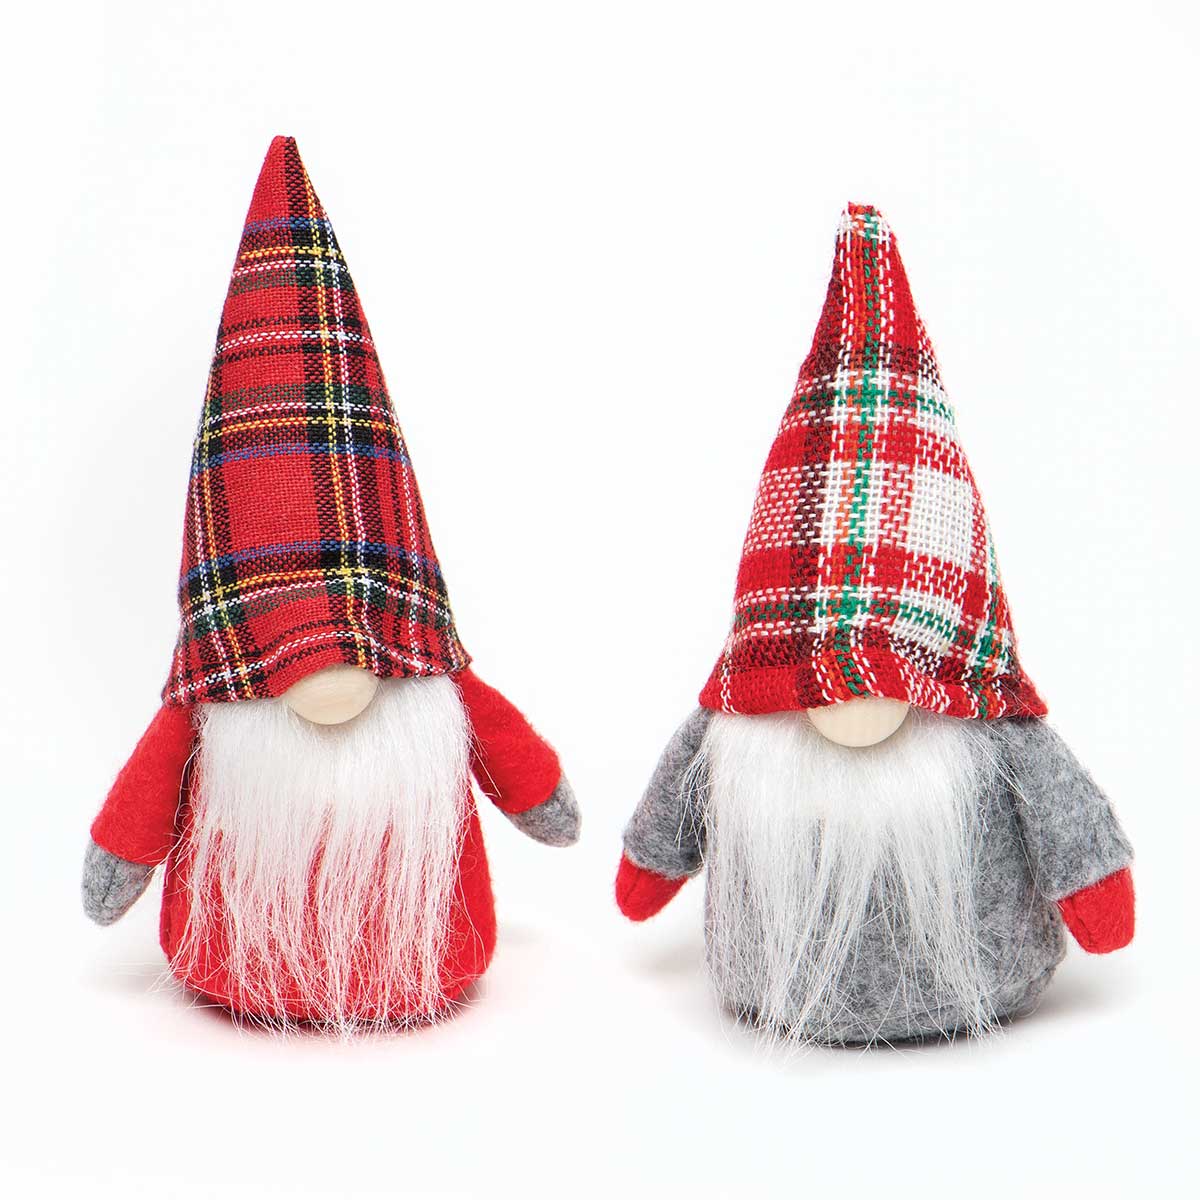 WEE GNOME ORNAMENT RED/GREY WITH PLAID KNIT/FABRIC HAT